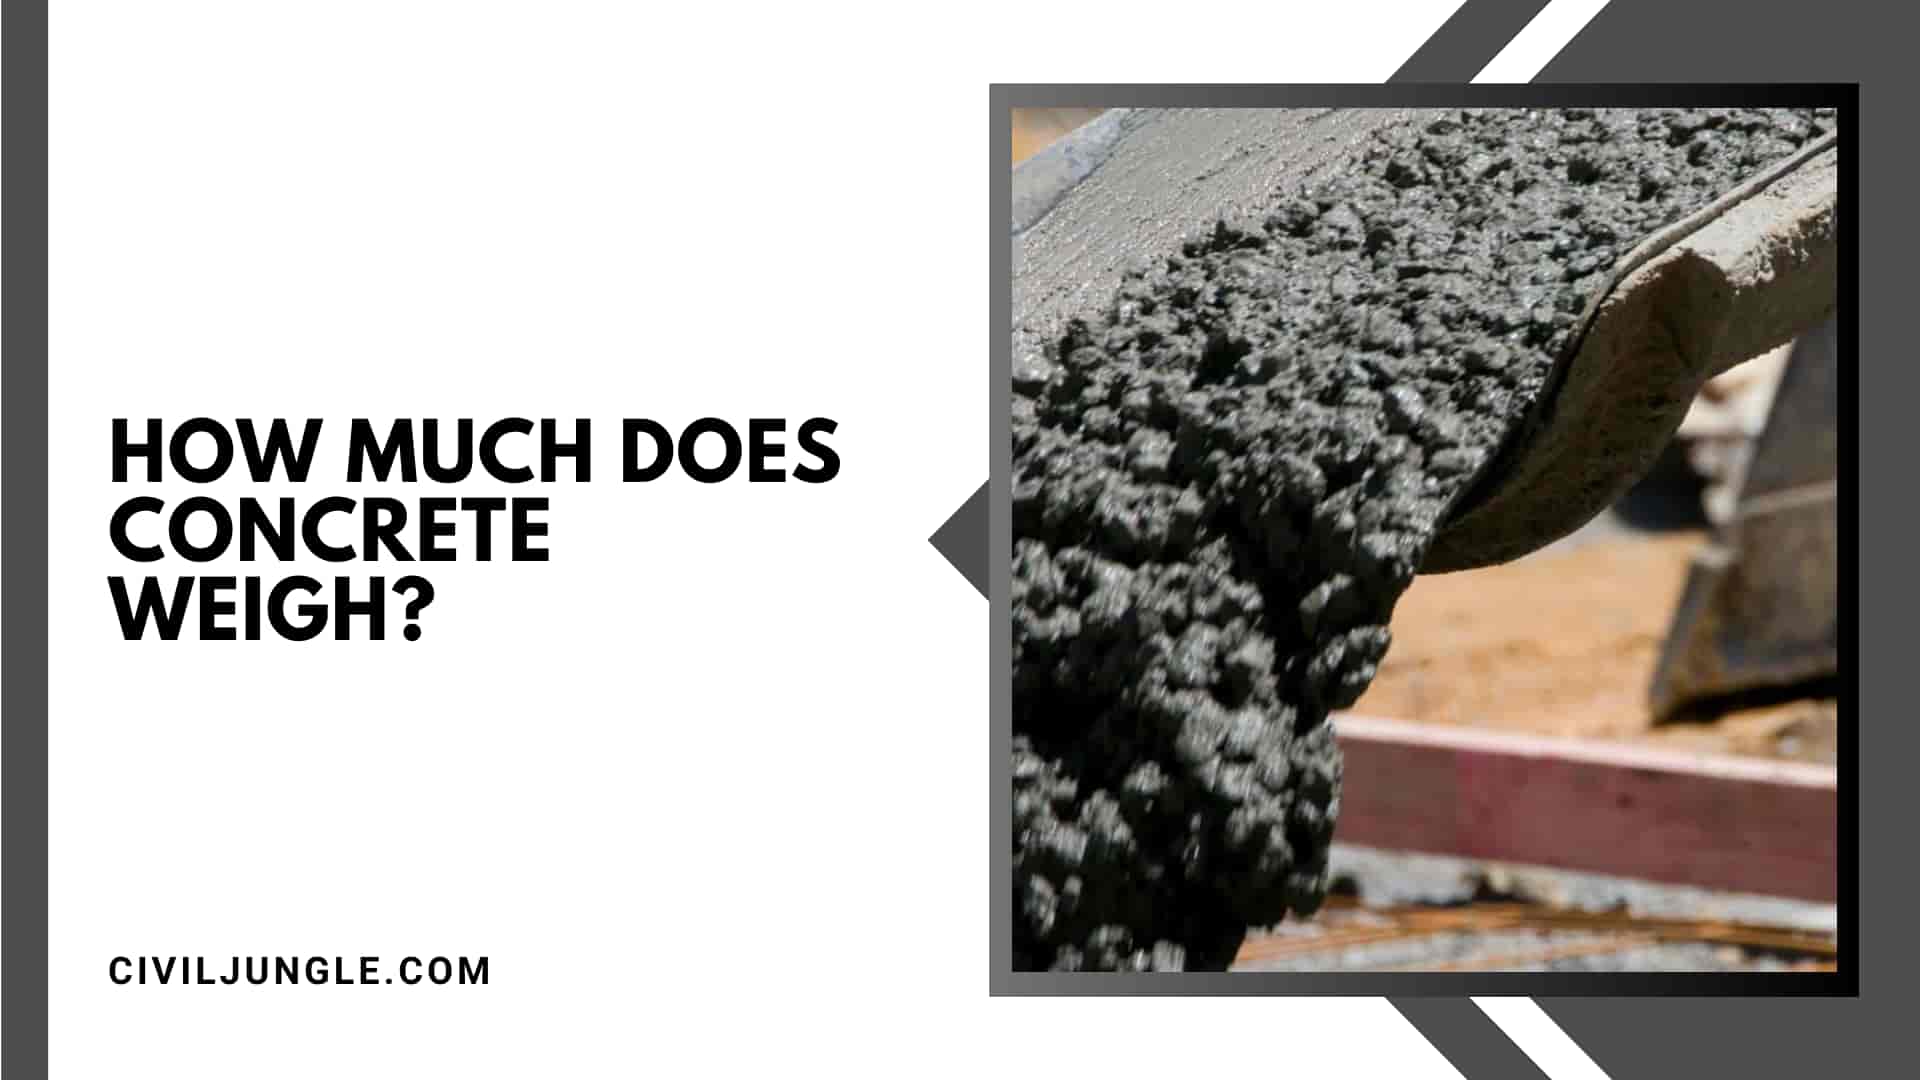 How Much Does Concrete Weigh?